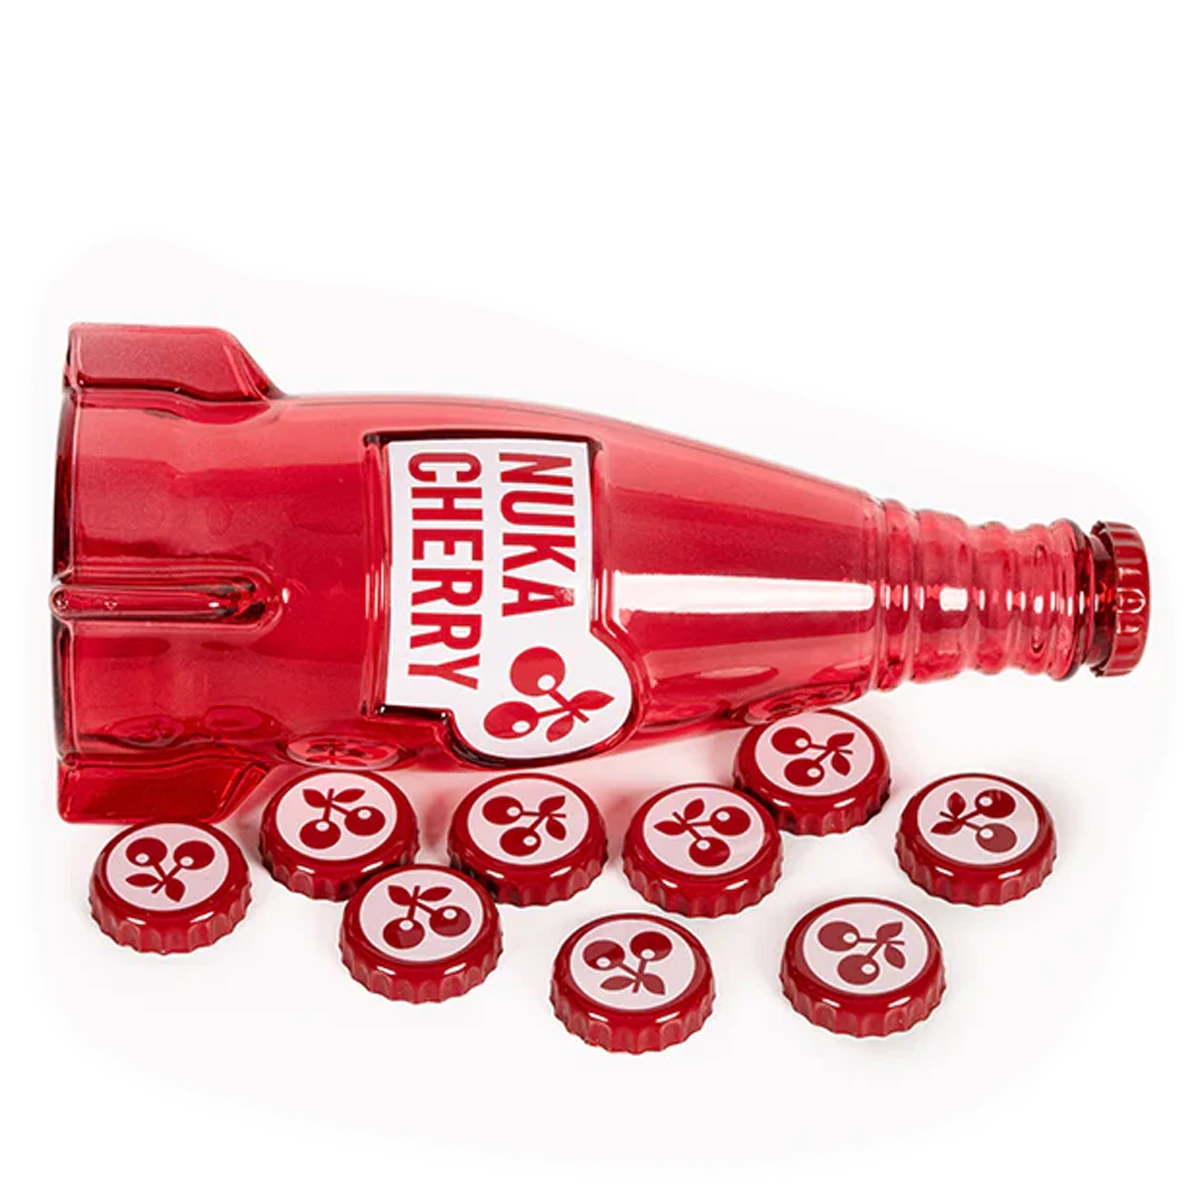 Fallout "Nuka Cola Cherry" Glass Bottle and Caps Image 3